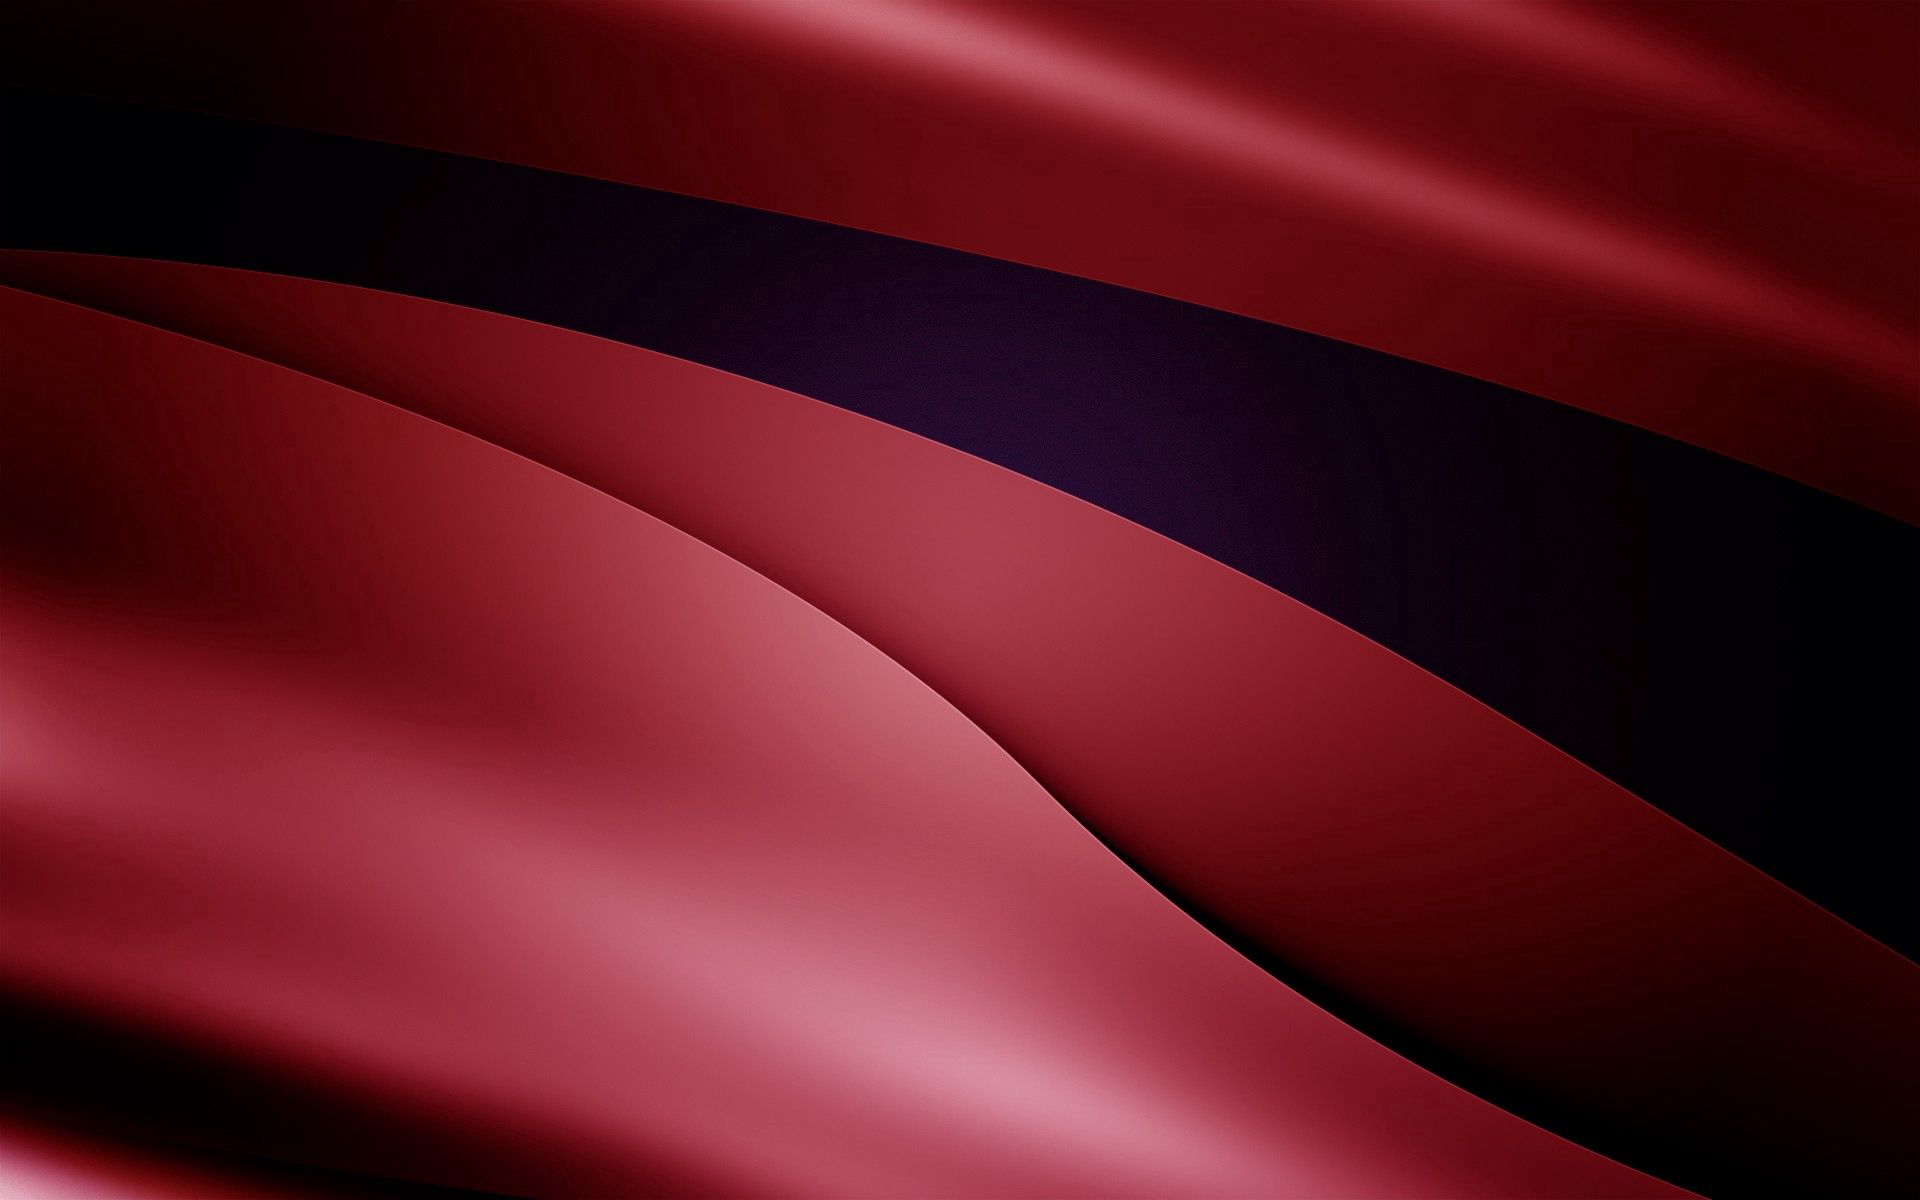 wavy, abstract, red, lines, form